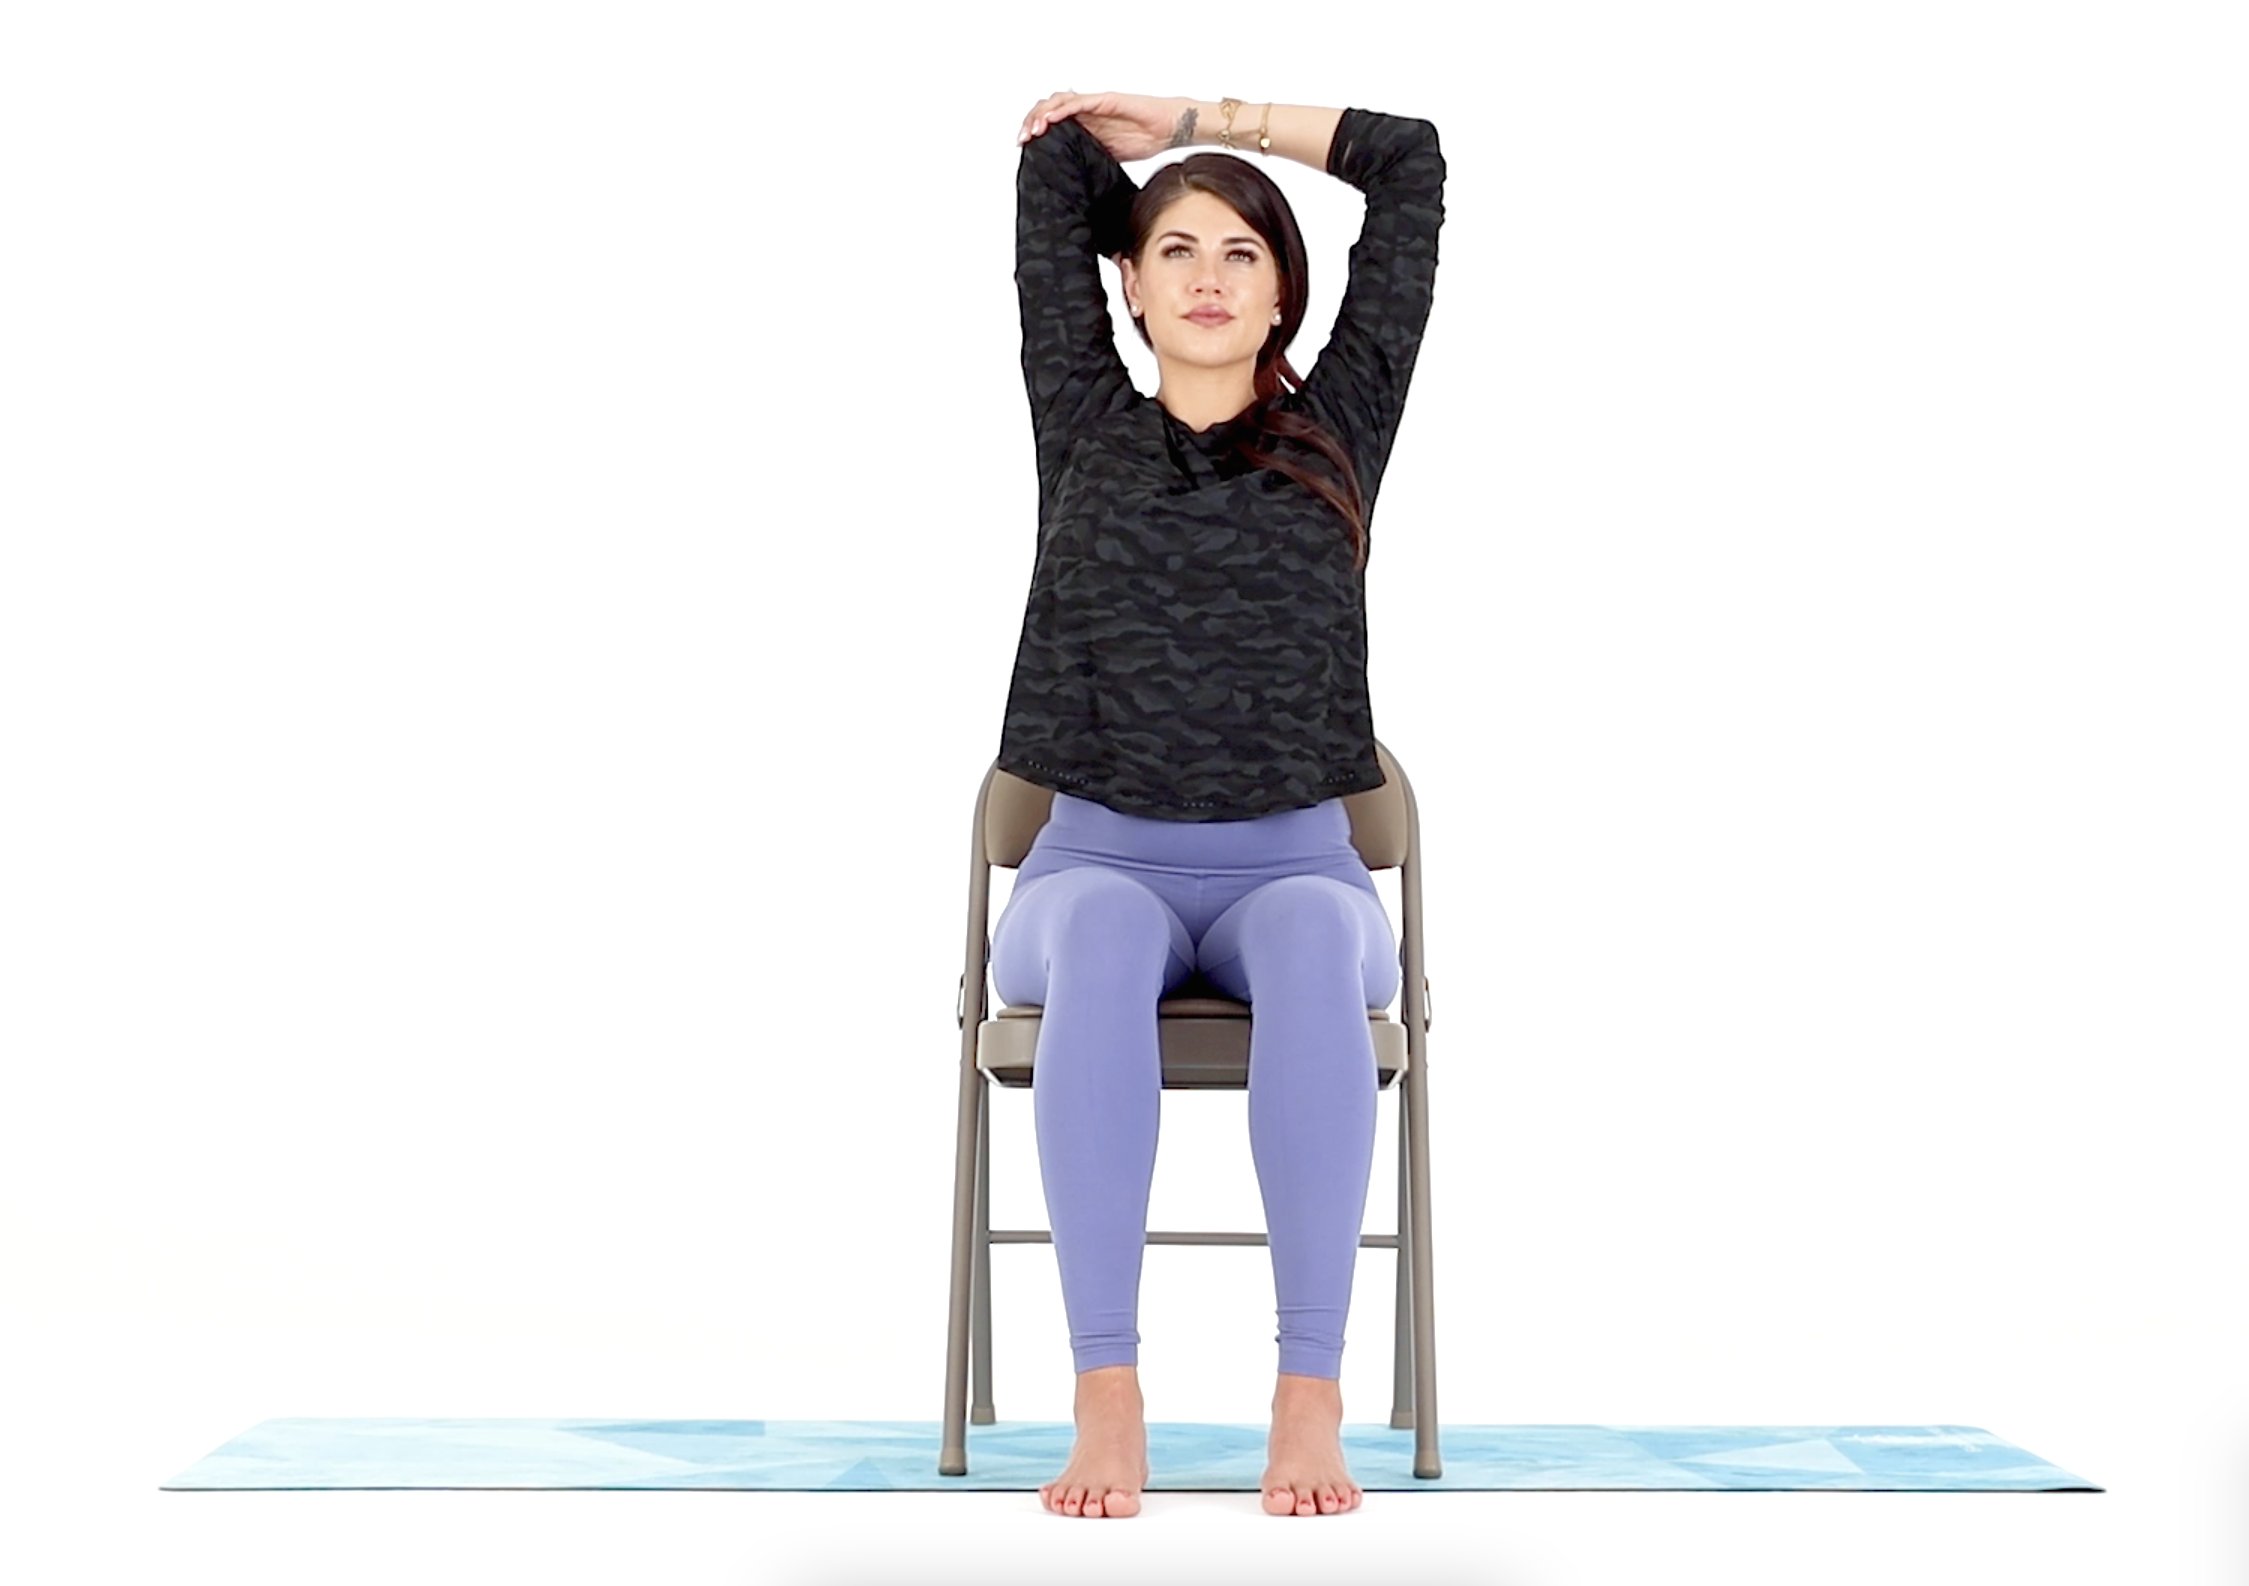 6 Seated Yoga Stretches for Walkers and Runners | MyFitnessPal